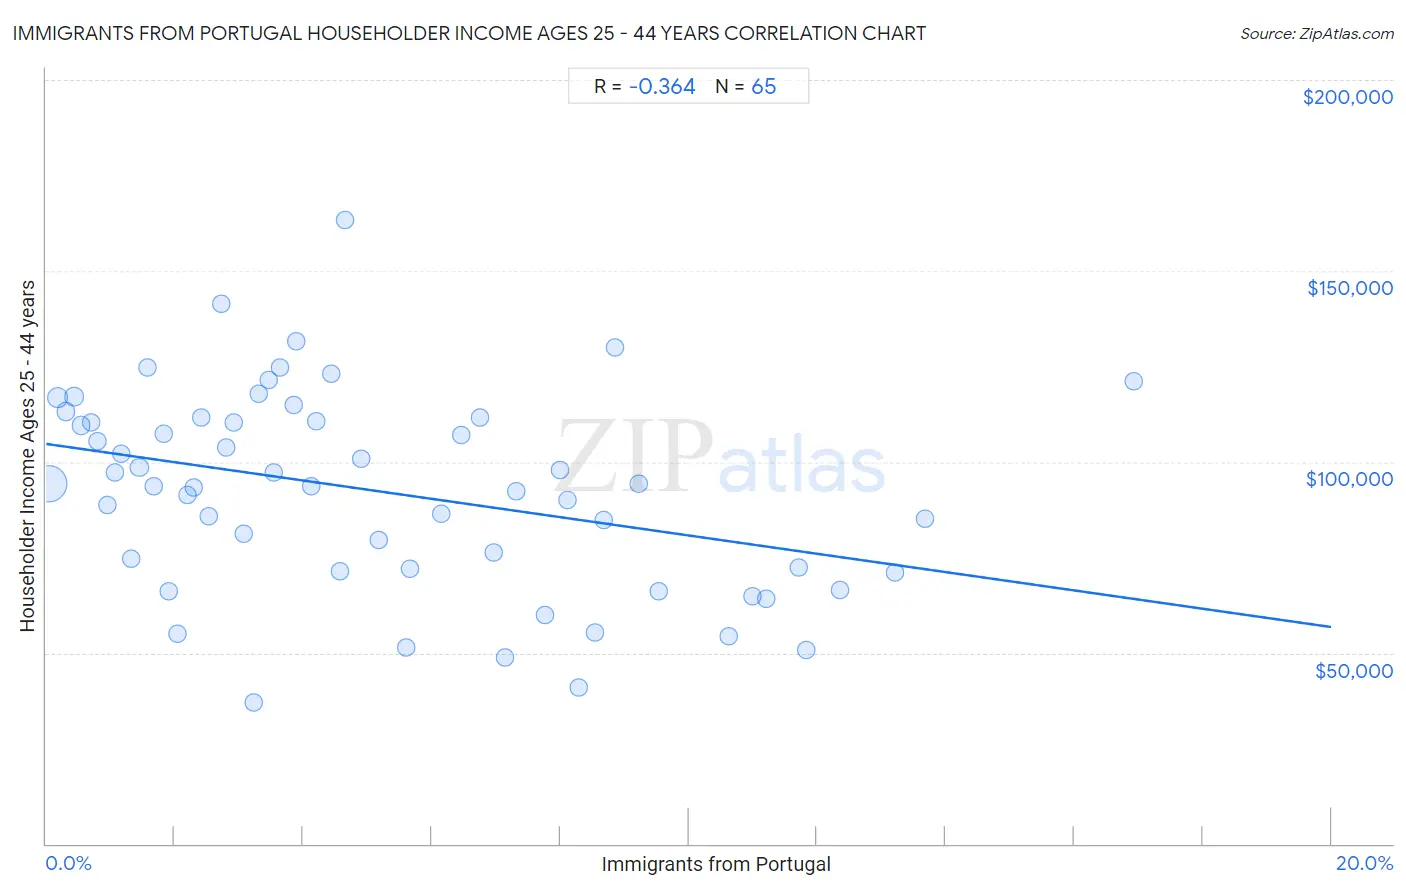 Immigrants from Portugal Householder Income Ages 25 - 44 years